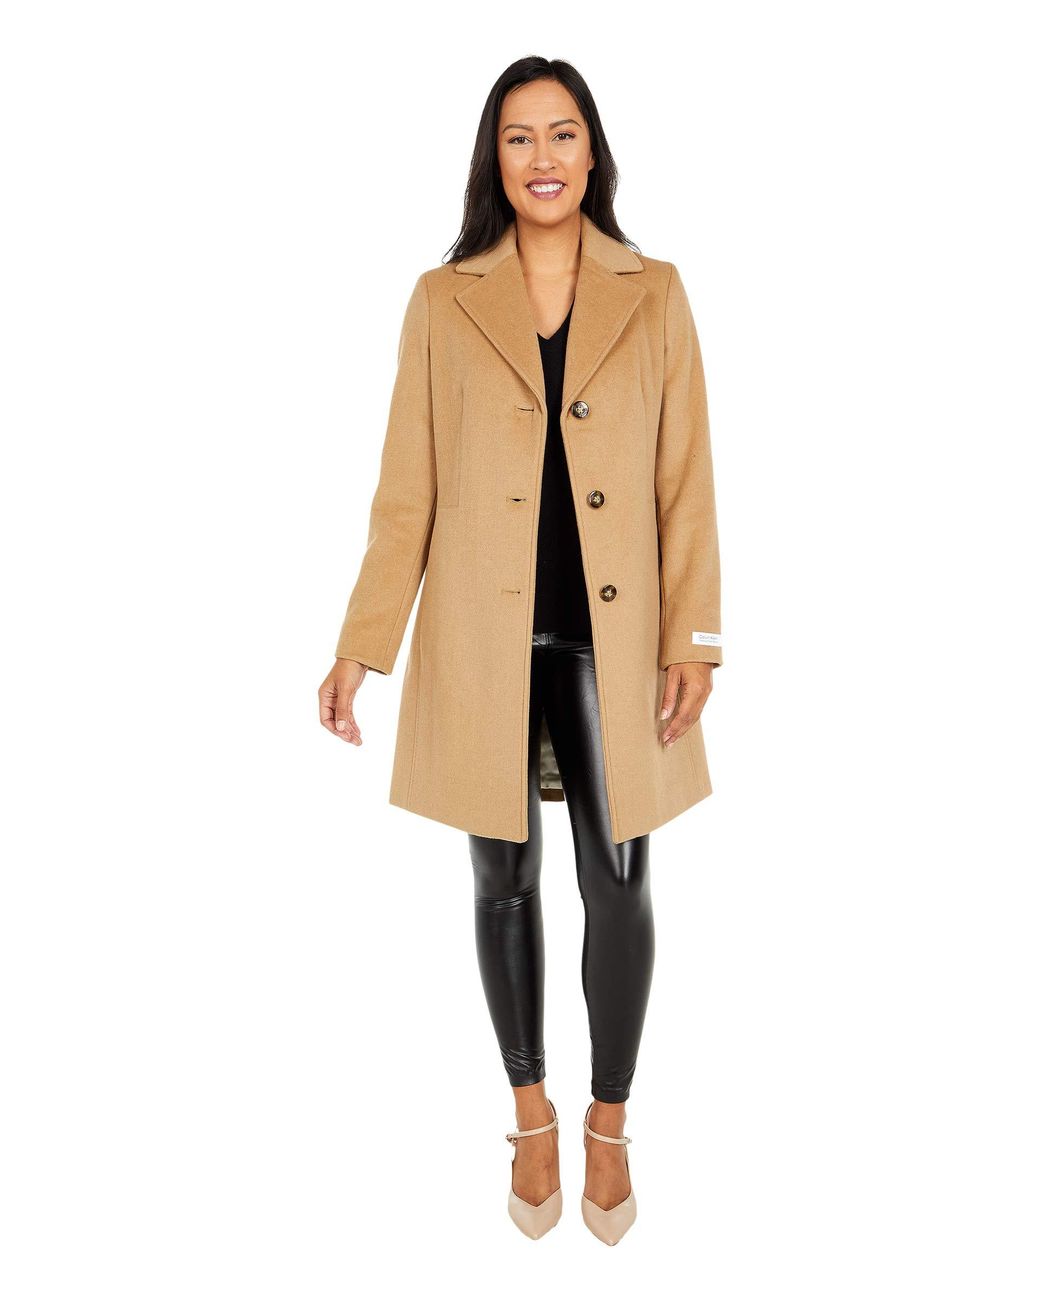 Calvin Klein Classic Single Breasted Wool Coat in Tan (Natural) - Lyst